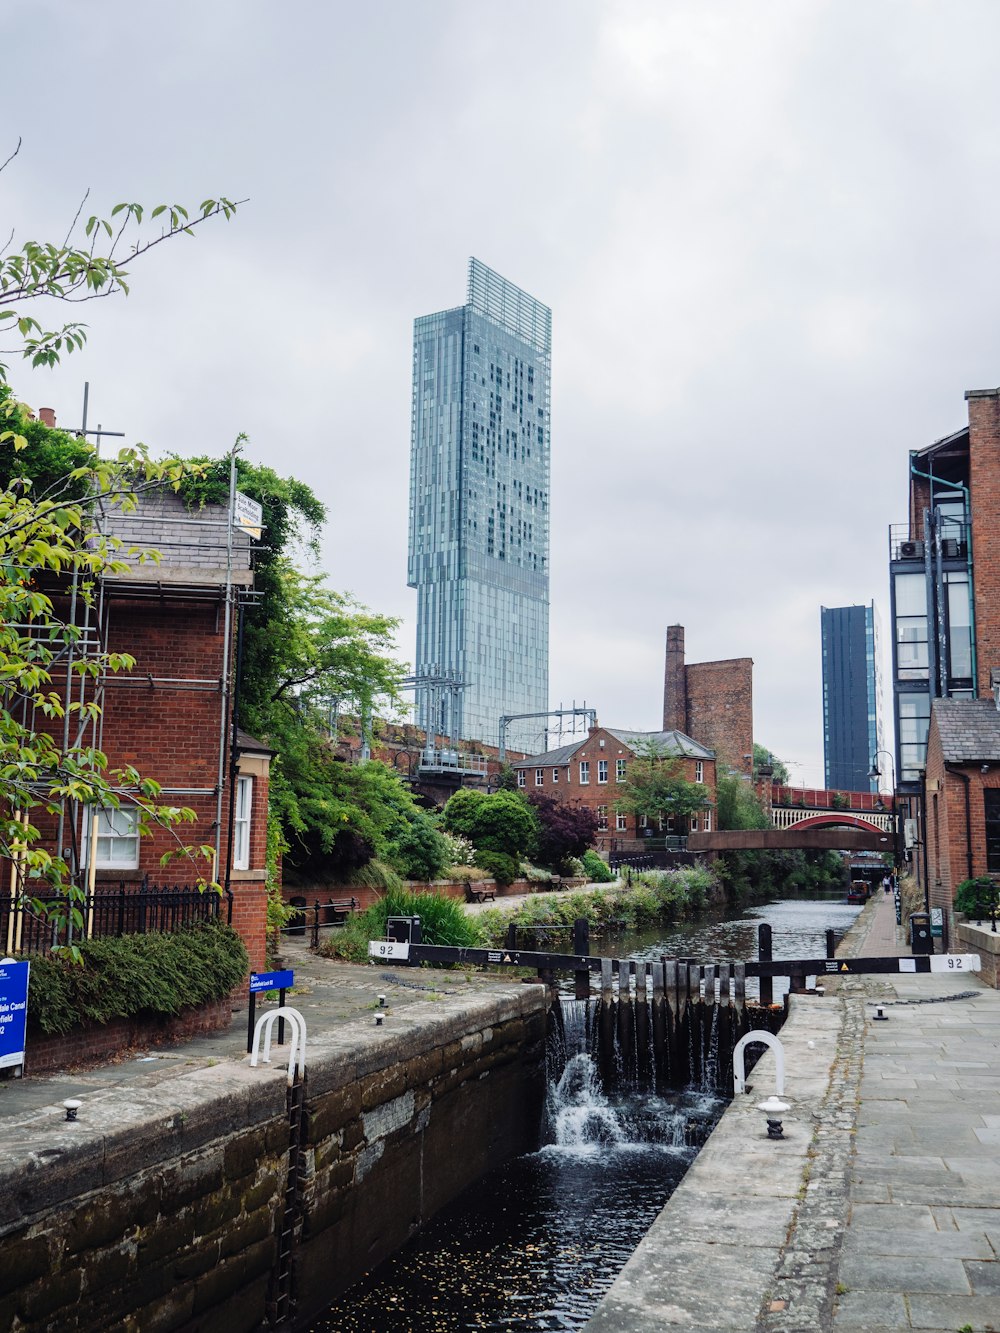 30 Must-Know Facts About The City of Manchester, UK